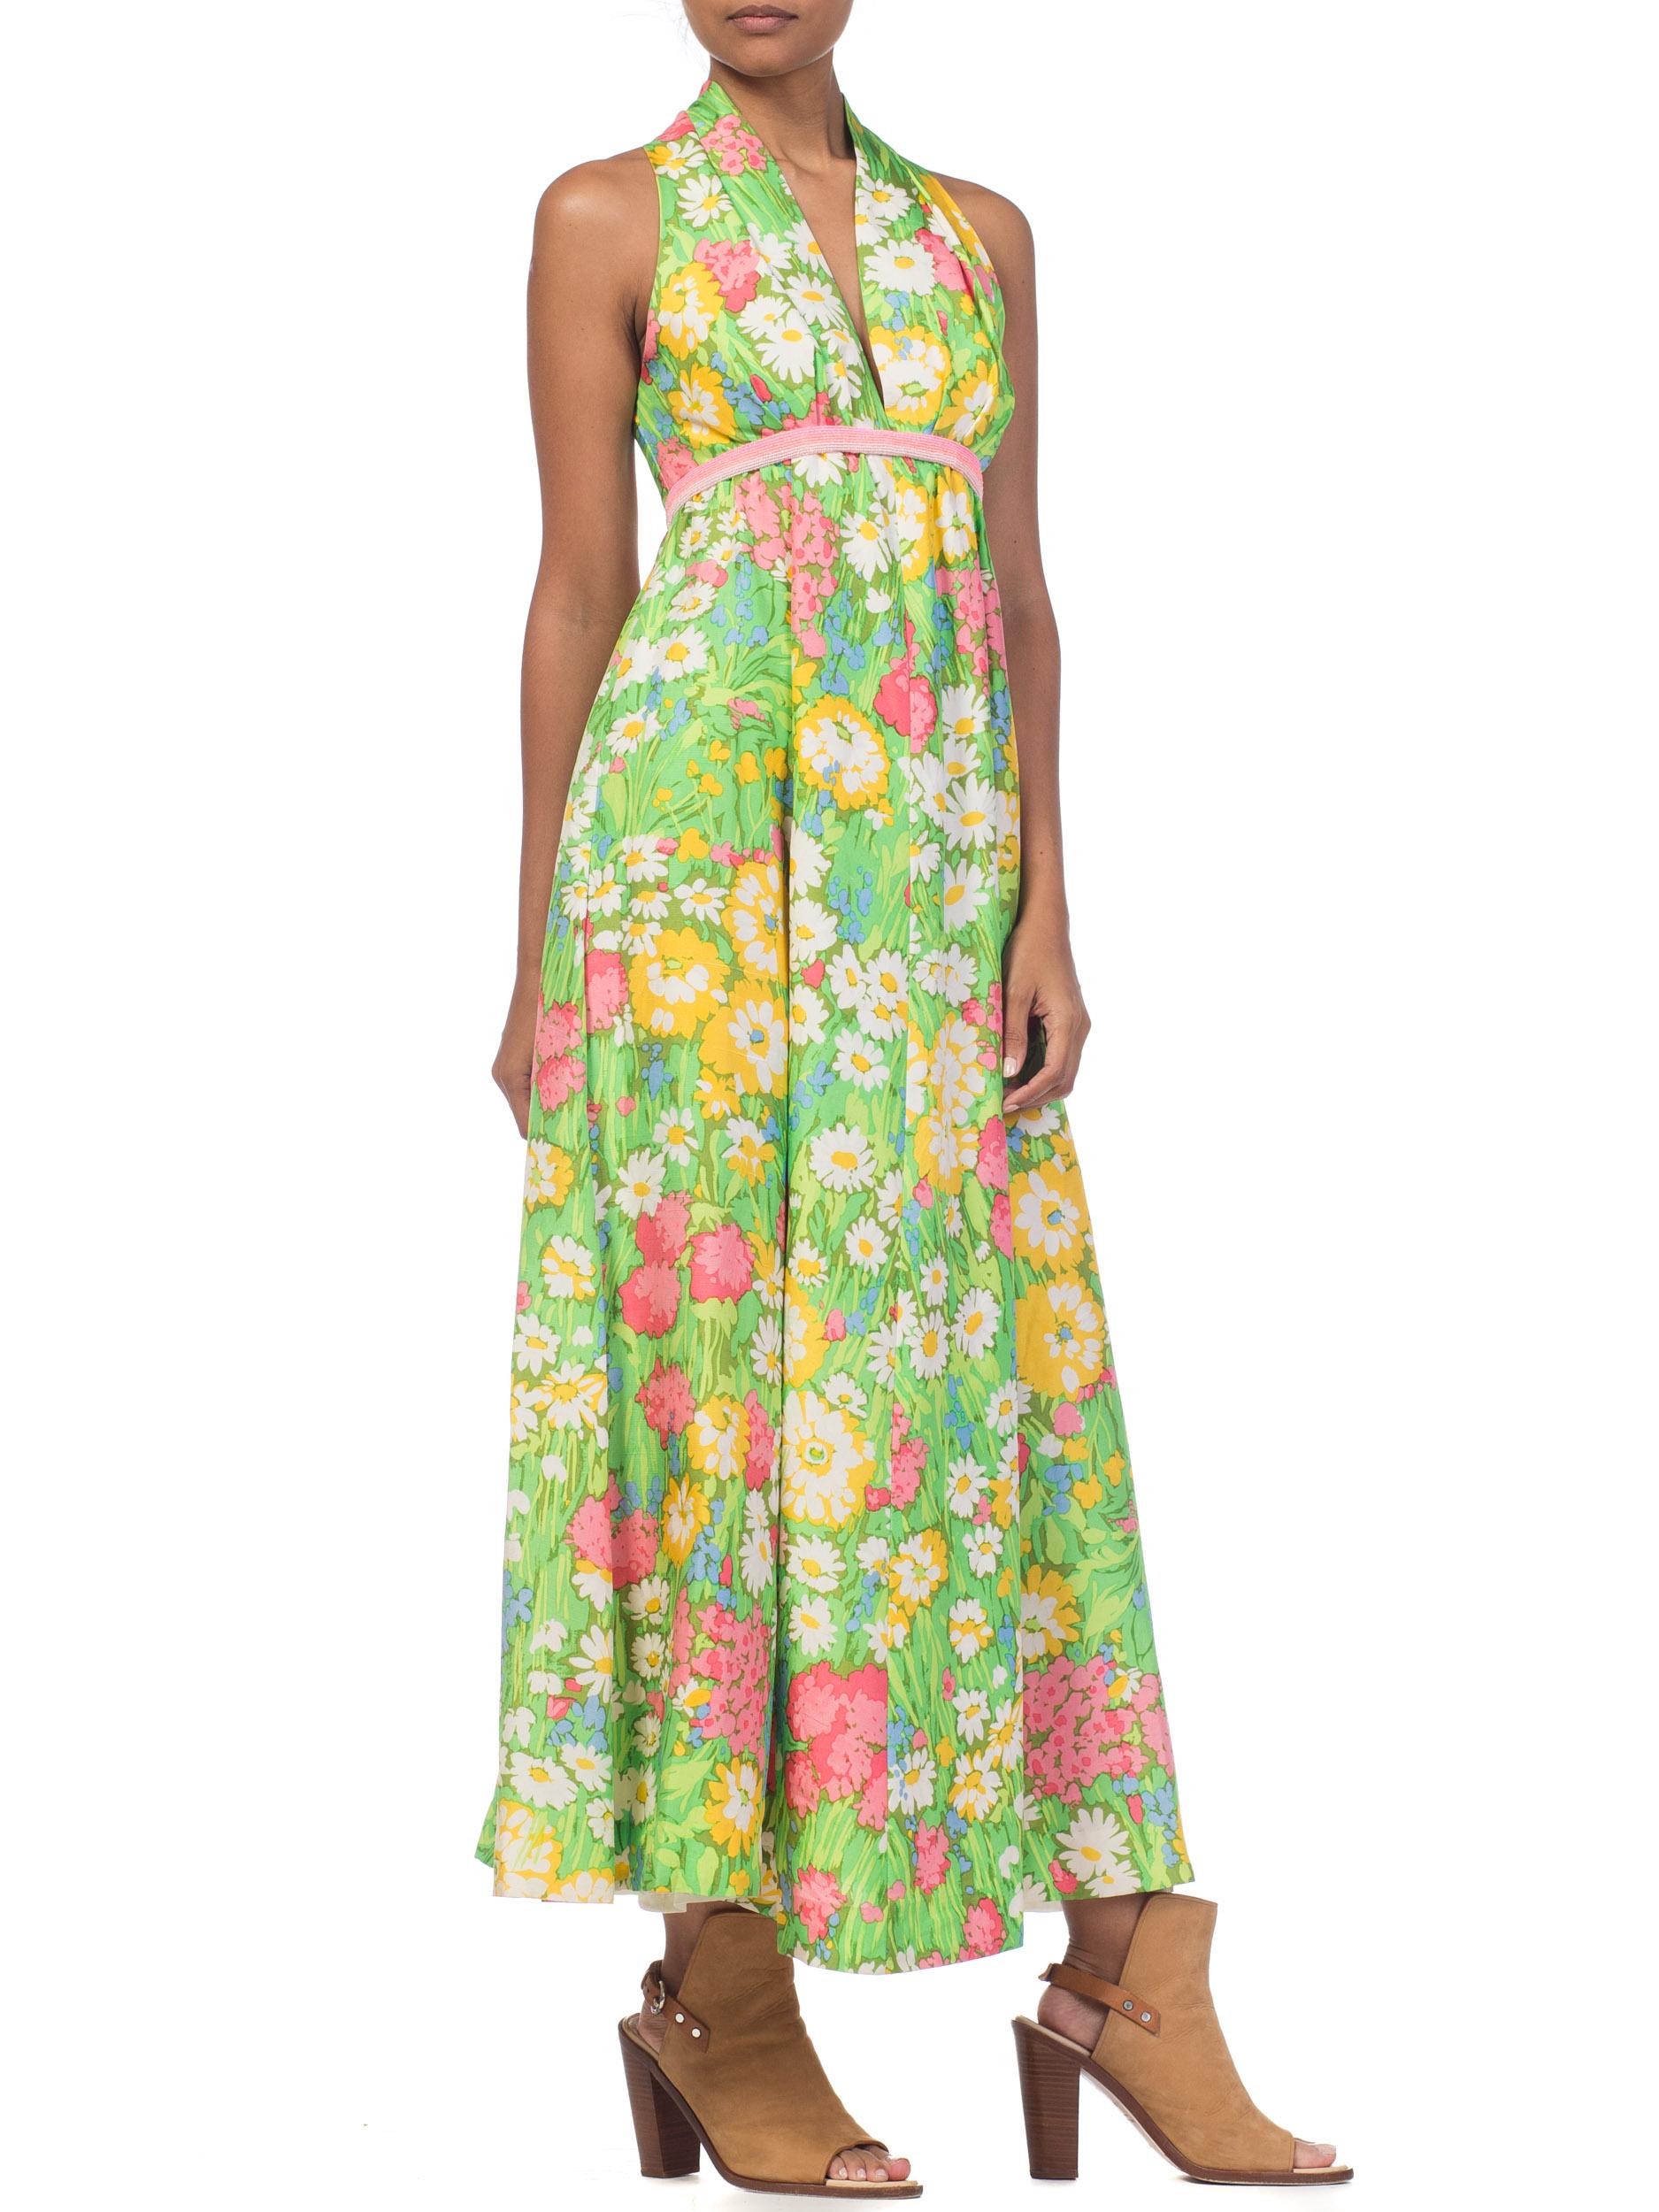 Women's 1960s 1970s Floral Printed Silk Halter Dress with Beading